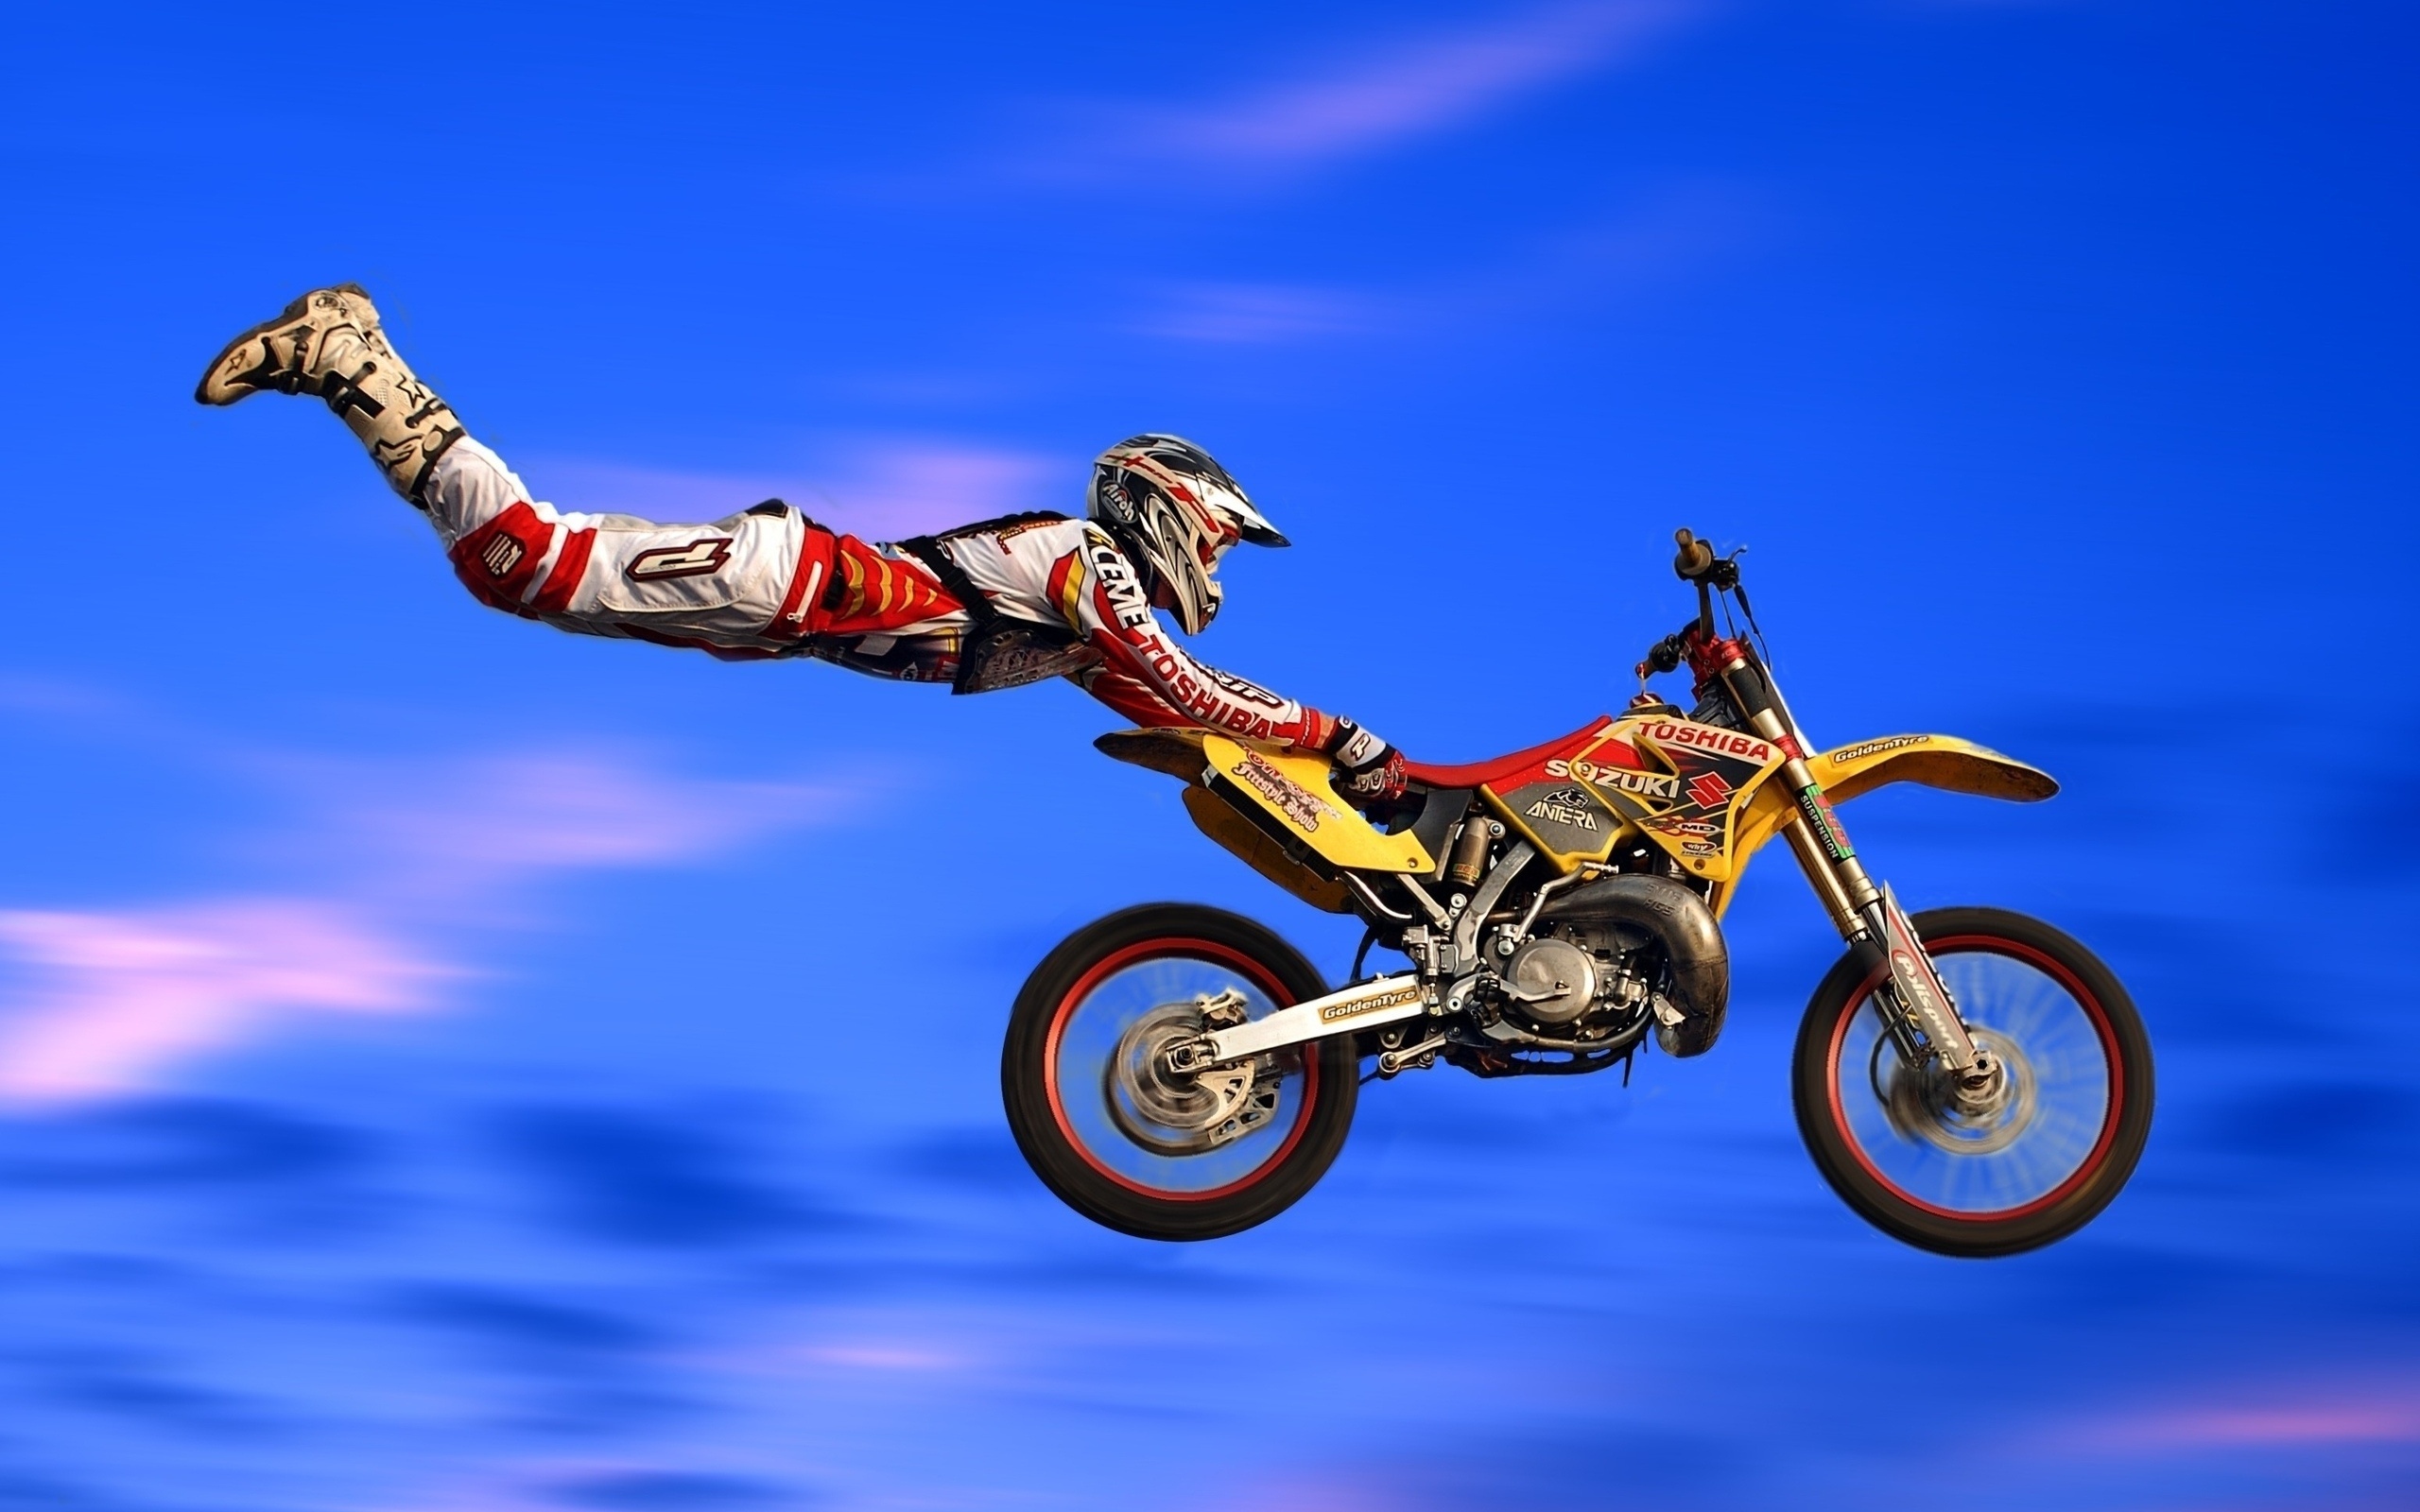 Stunt: Motocross, Acrobatic maneuvering of the motorcycle and the stuntman in the air. 2560x1600 HD Wallpaper.